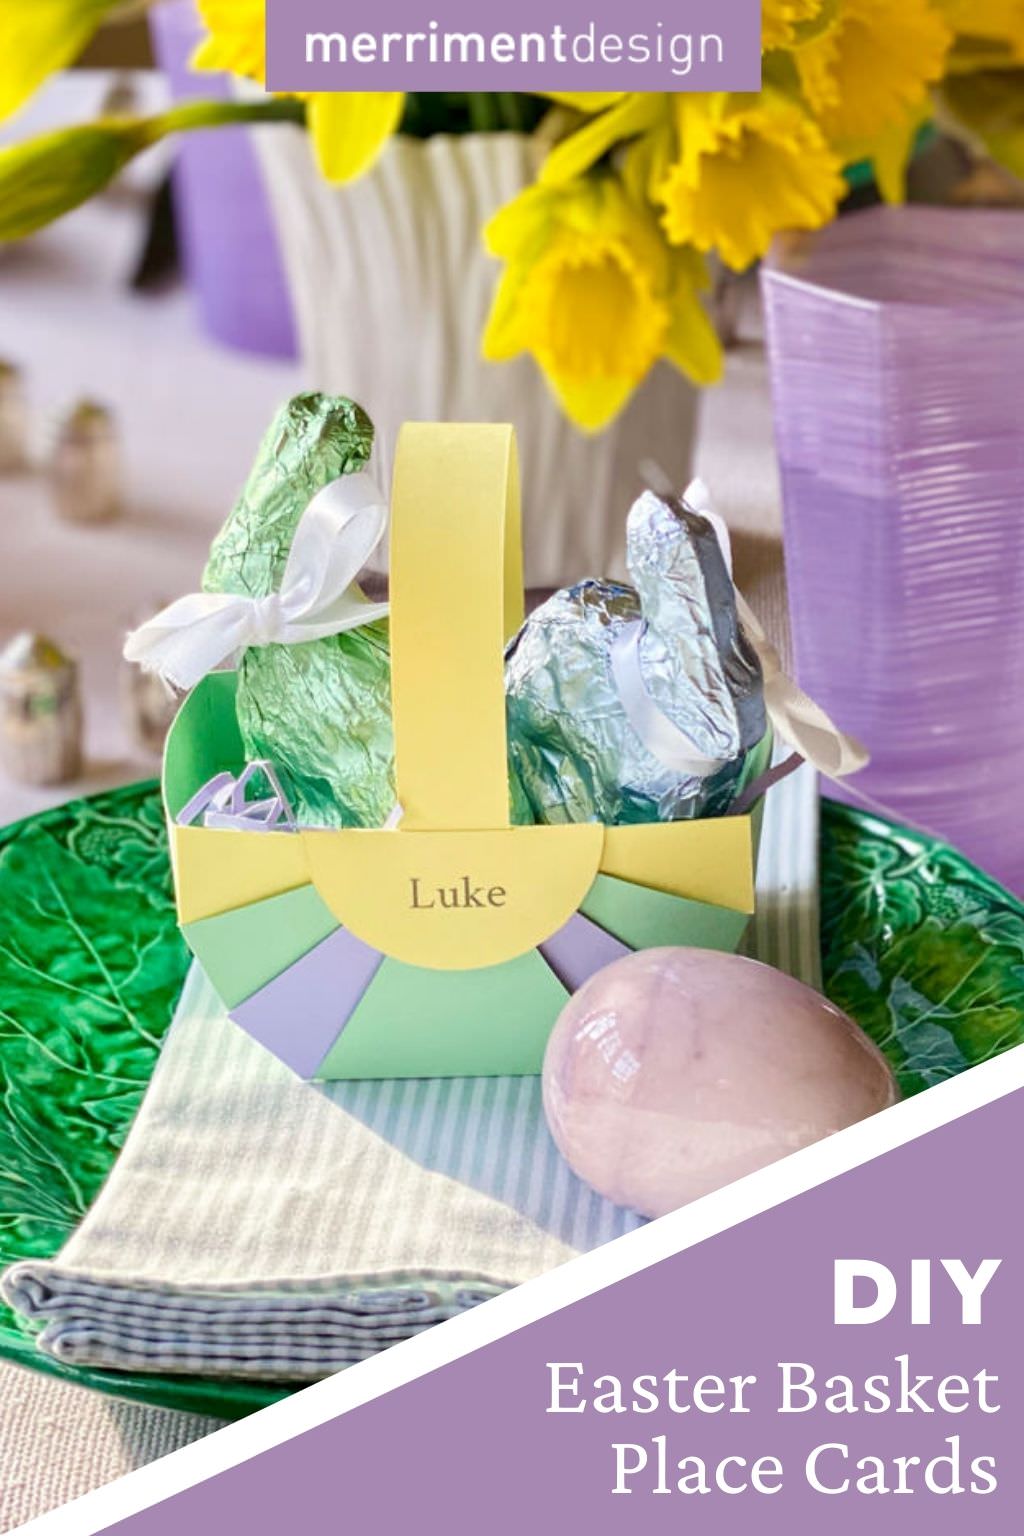 DIY Easter basket place cards for the Easter table